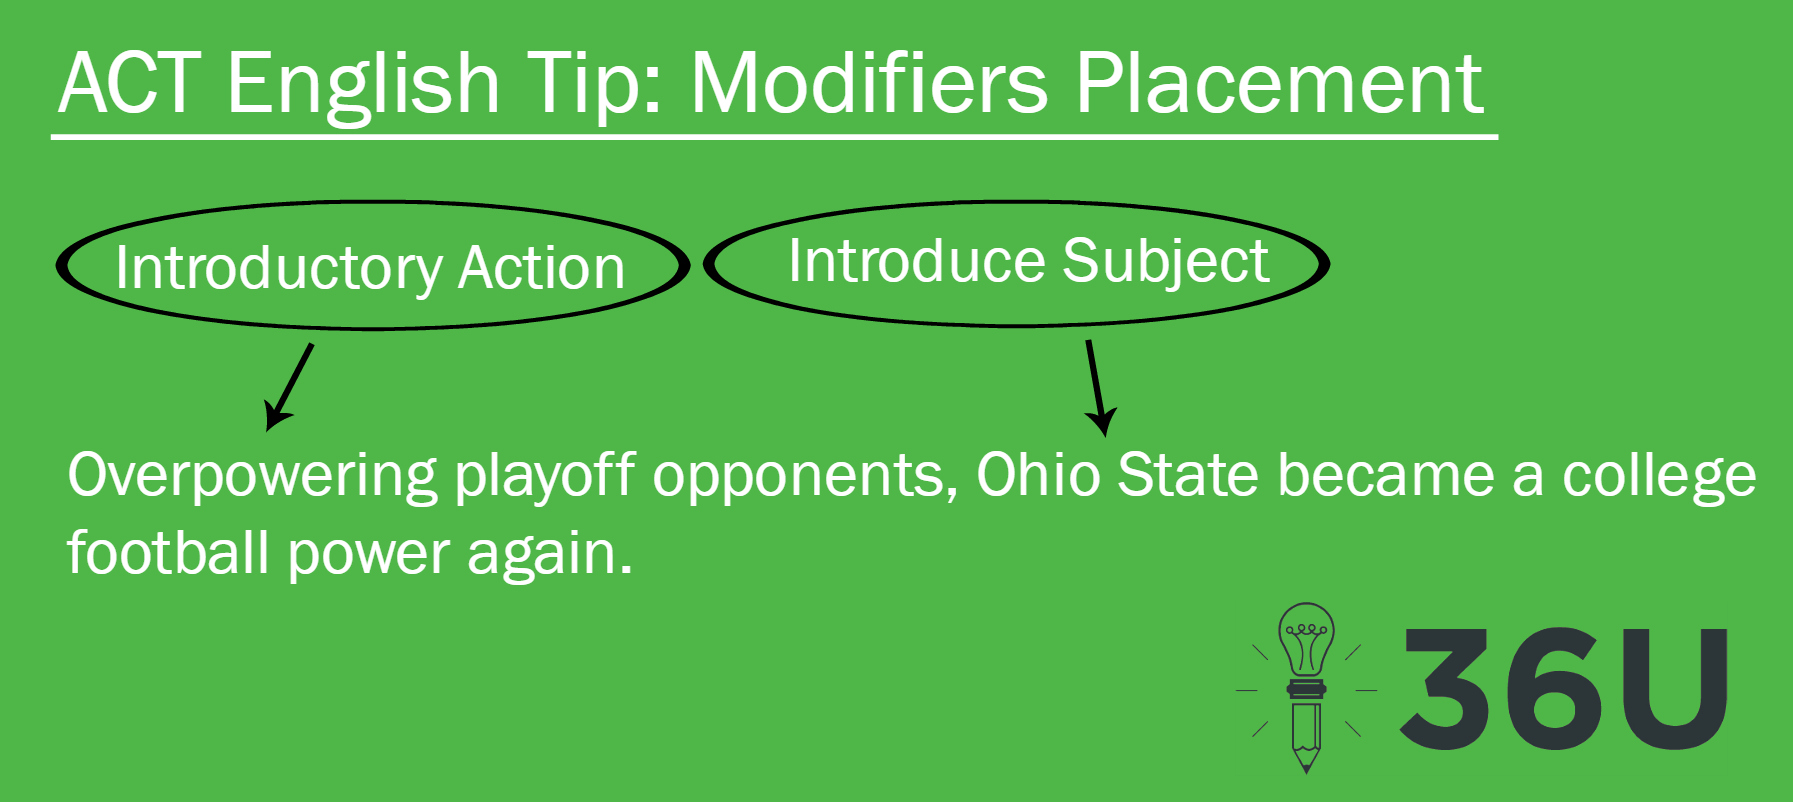 Modifiers Tip 1.13.15